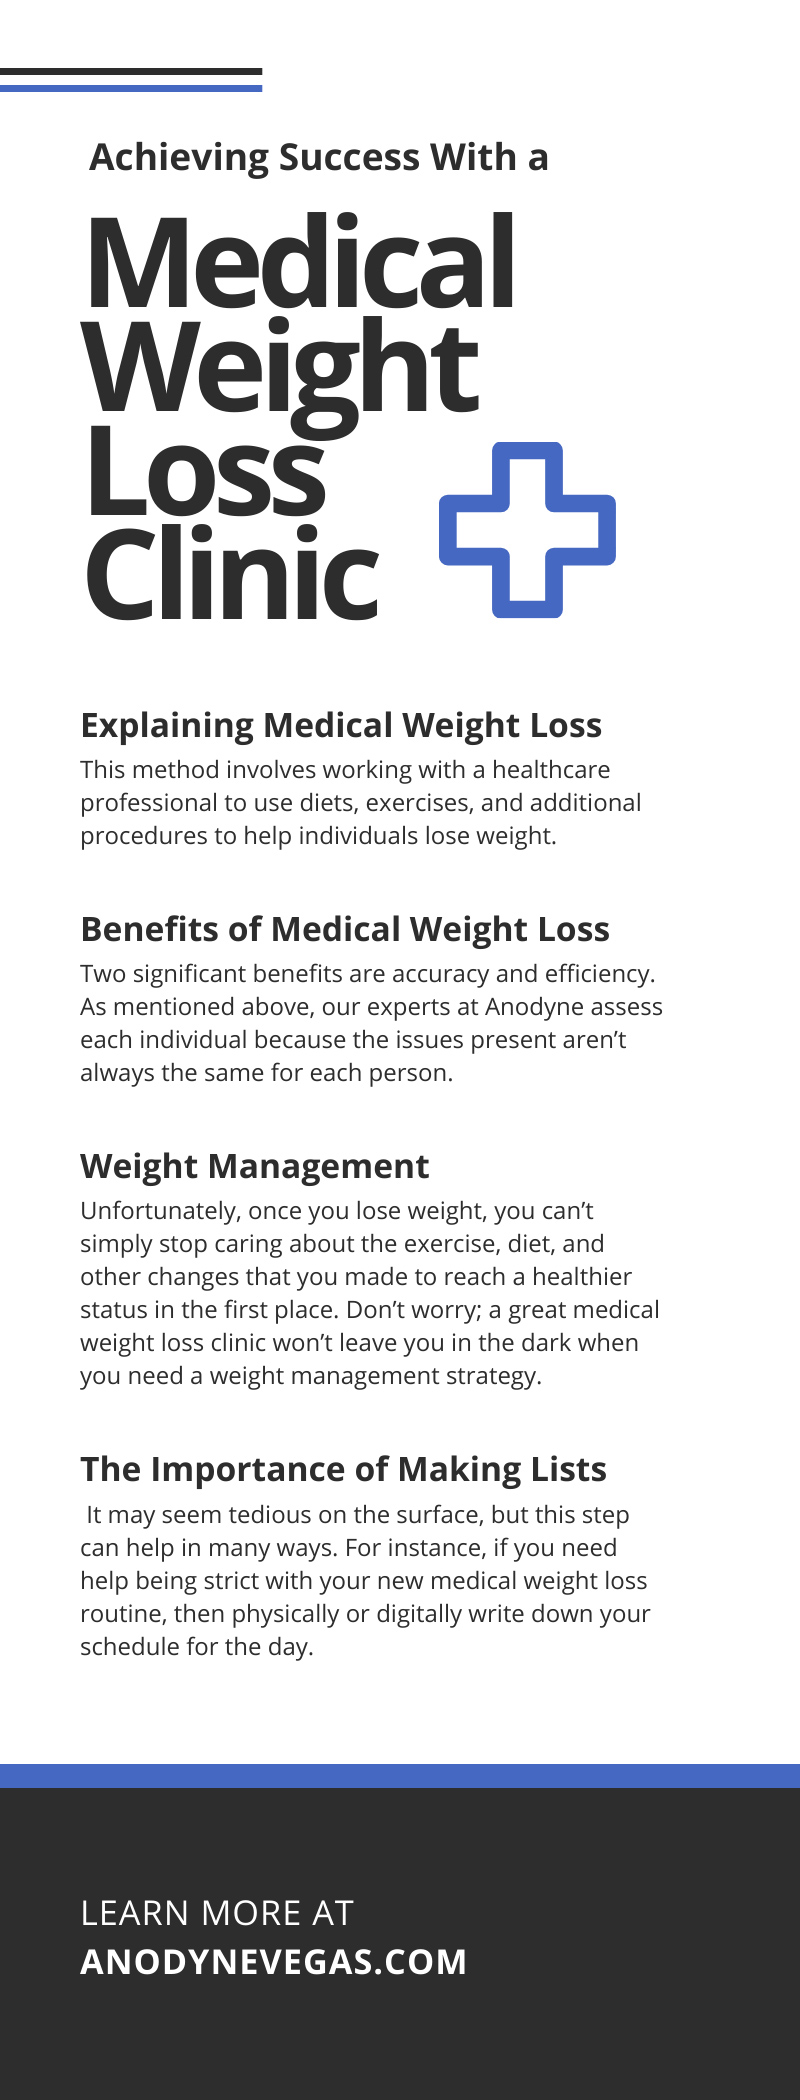 Achieving Success With a Medical Weight Loss Clinic
